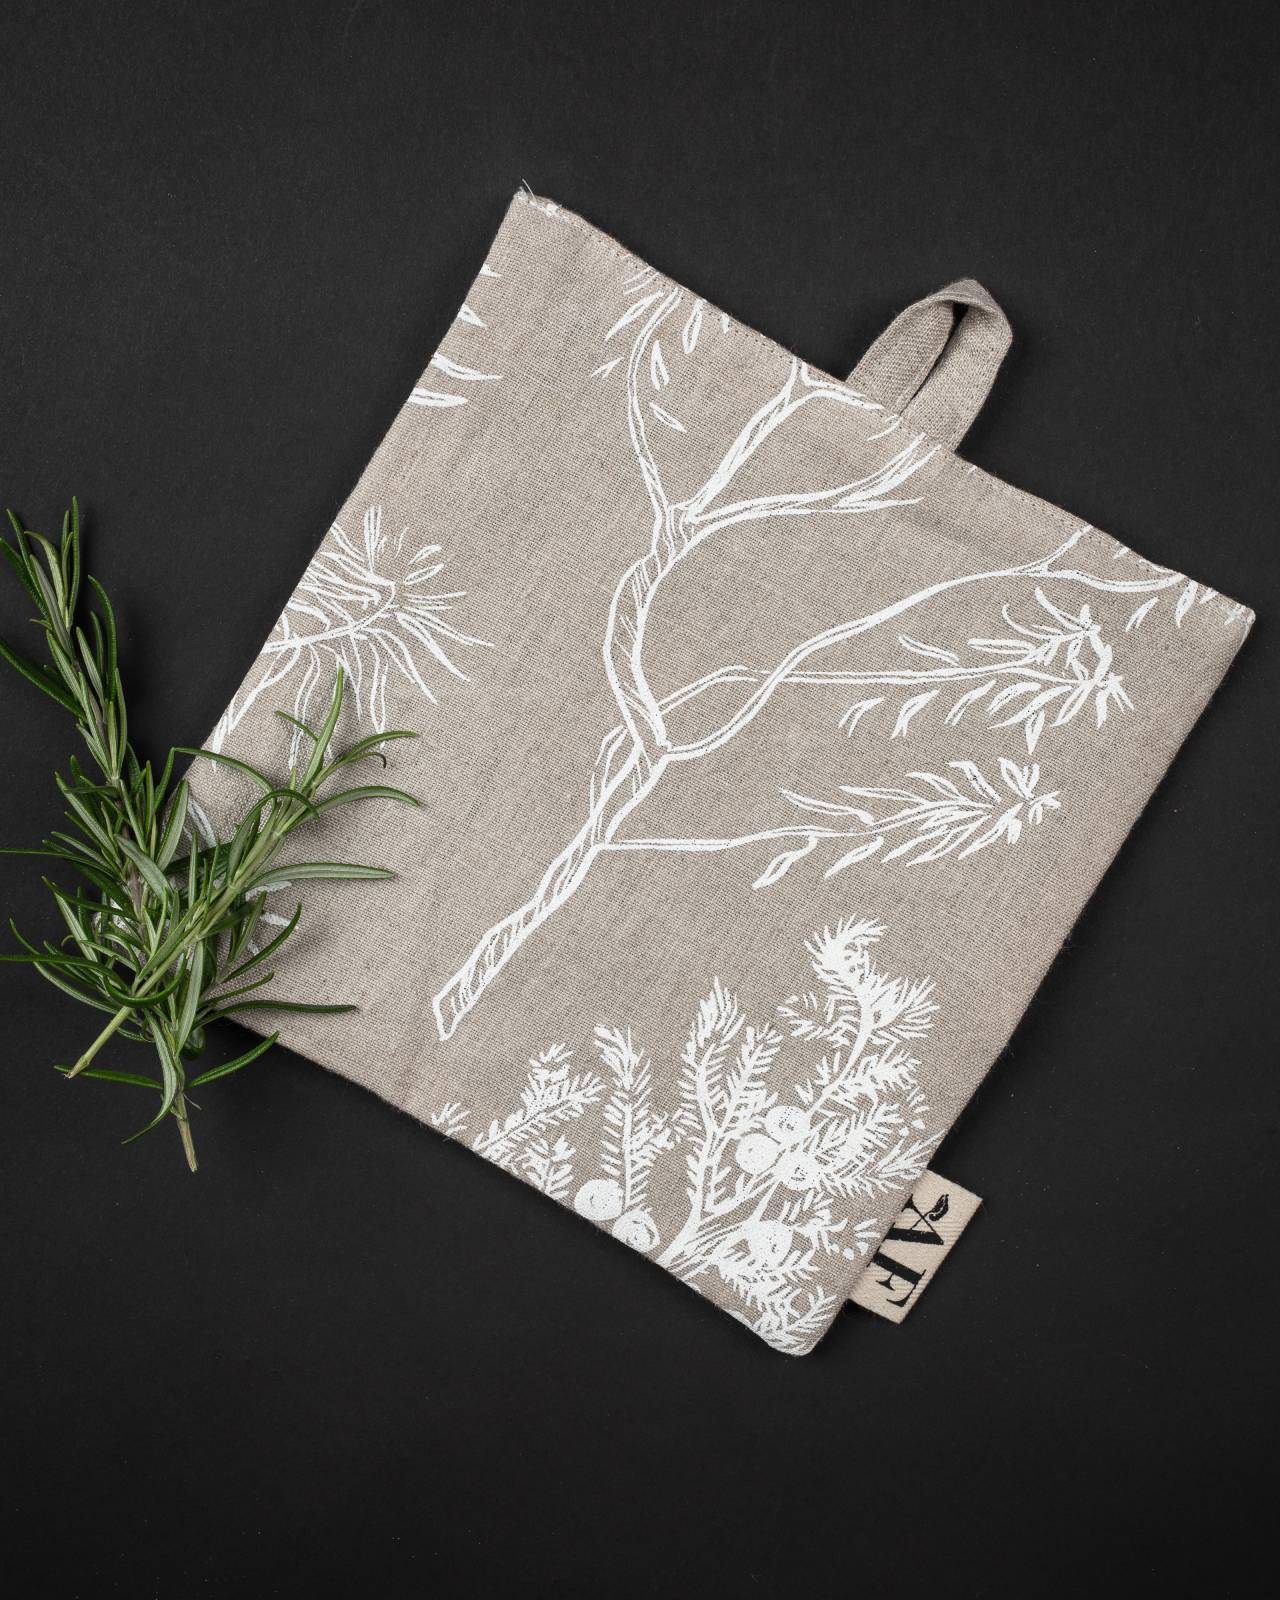 The pot holder is not just any cloth. The kitchen is the heart of the home – these textiles will add value to that. Arctic Flora kitchen textiles are made in Finland and are 100% European hemp.